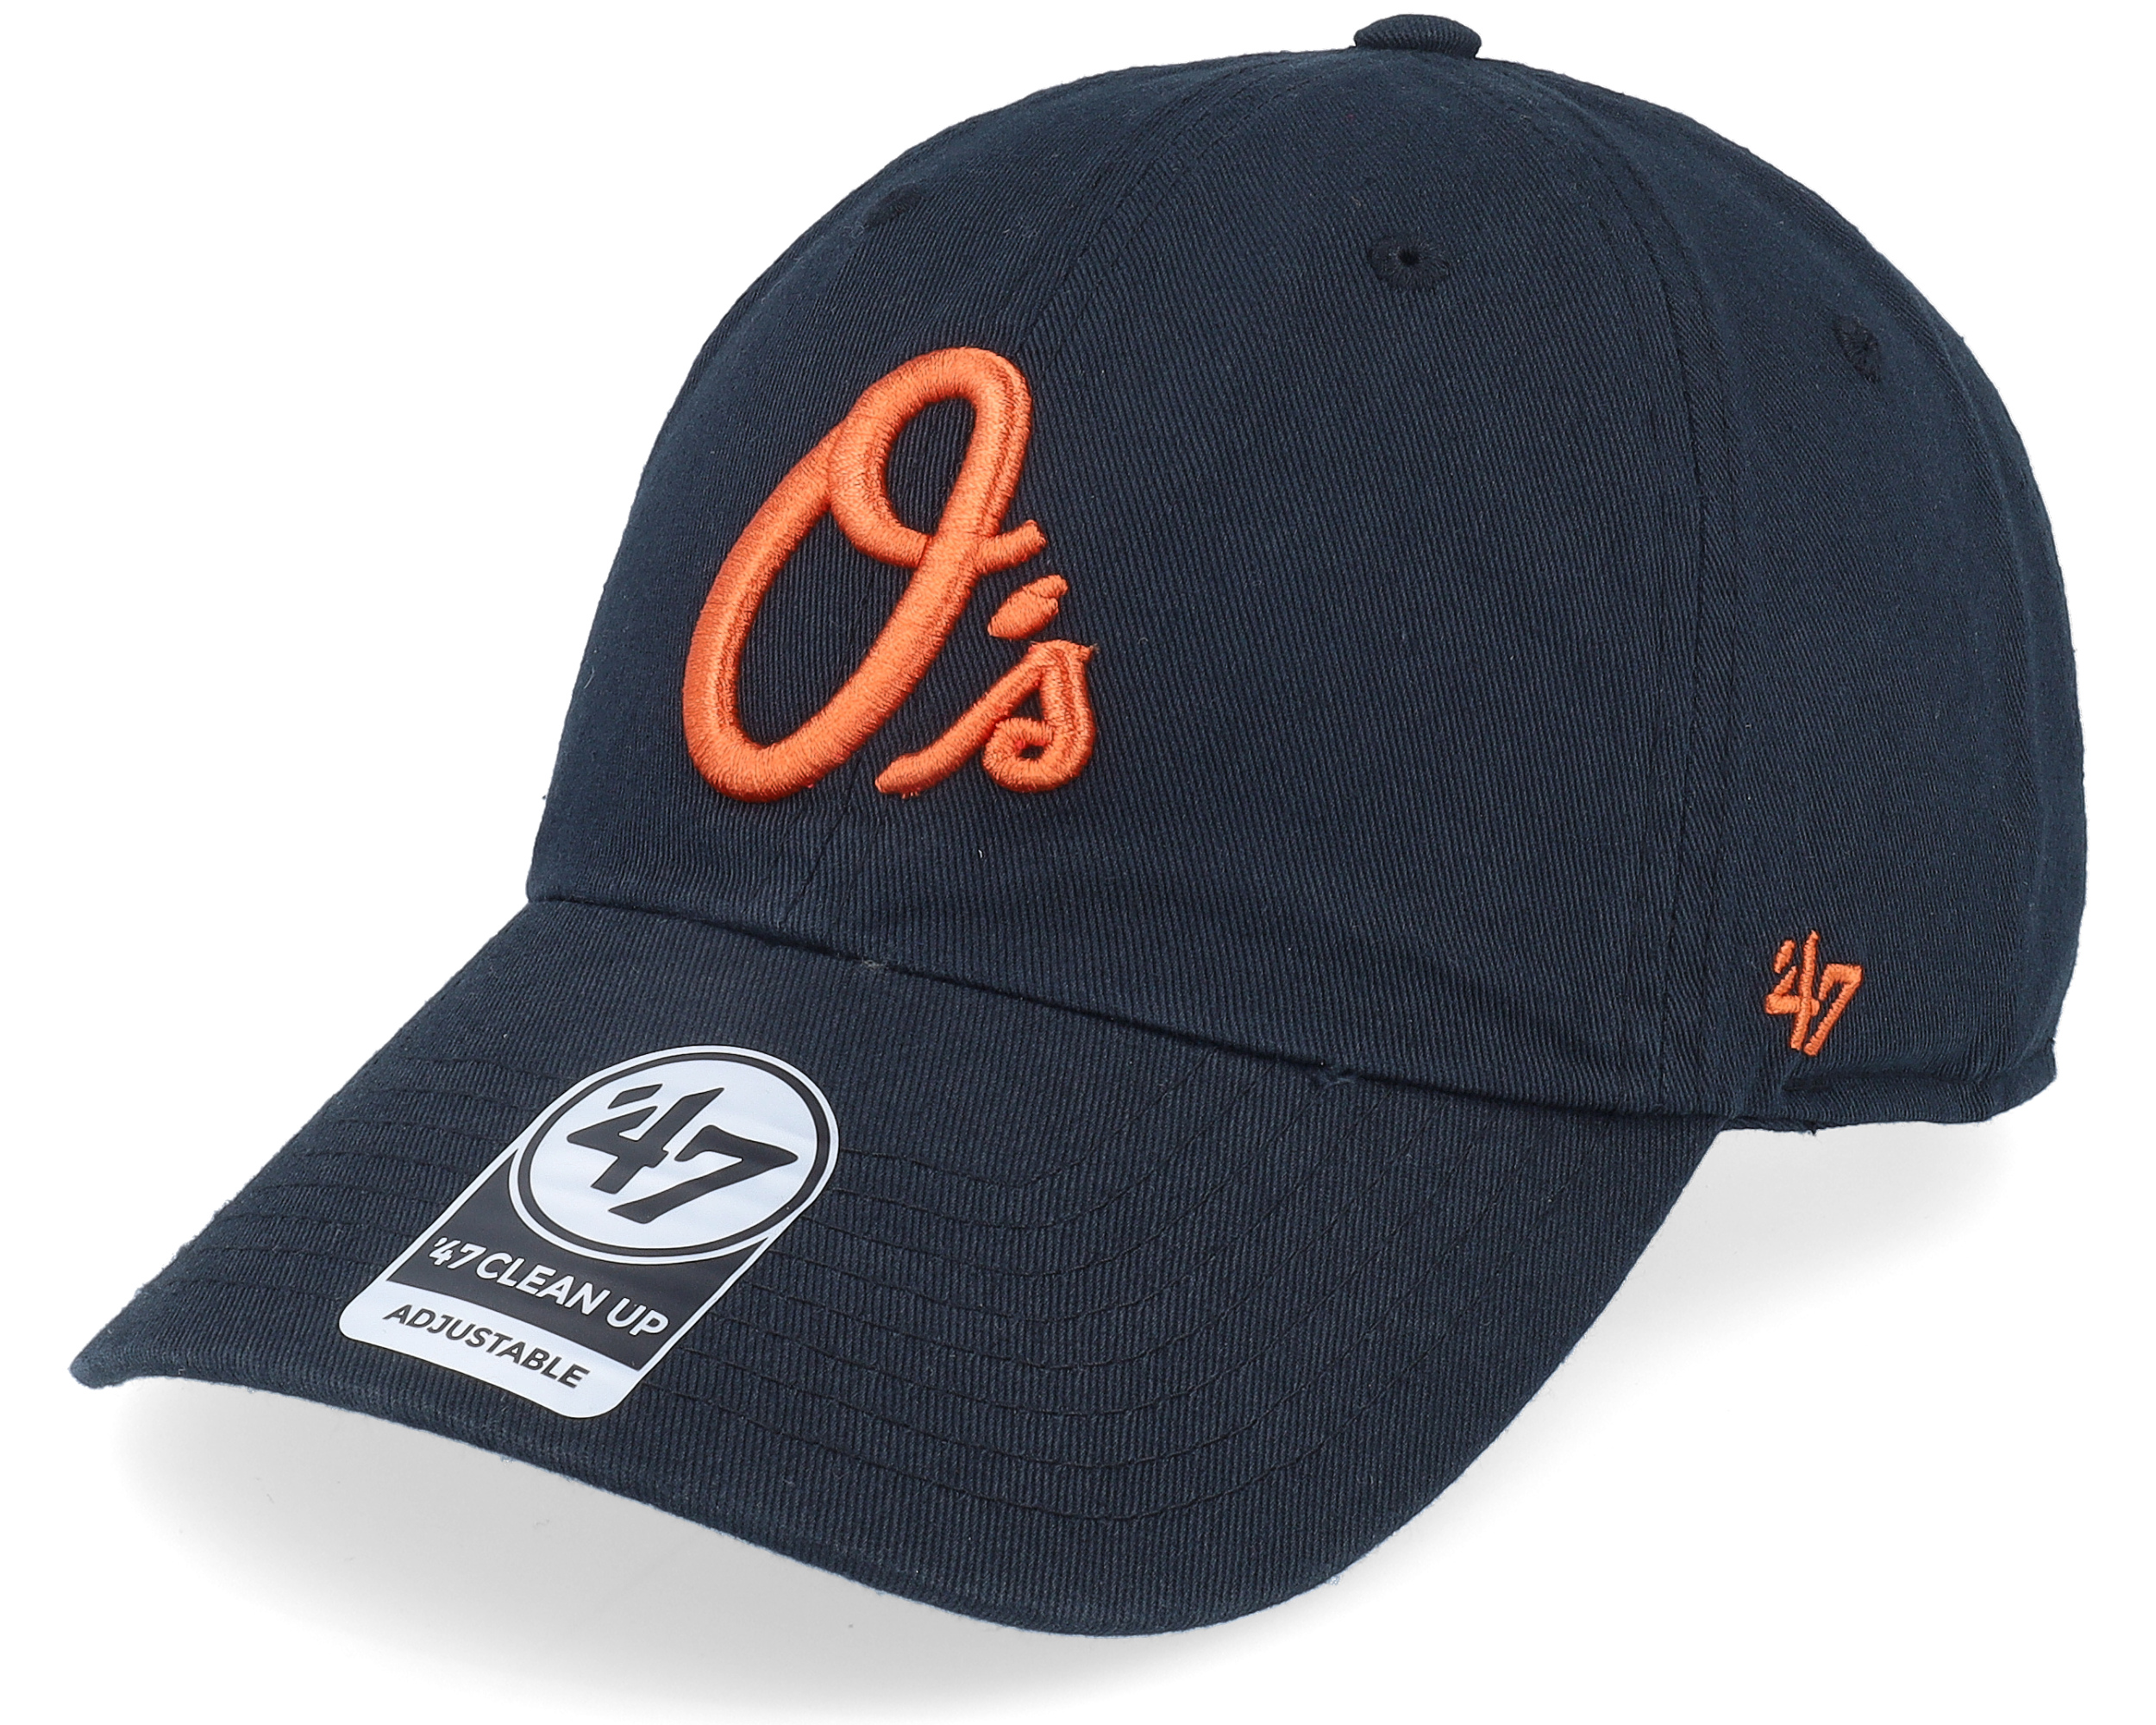 BALTIMORE ORIOLES CITY CONNECT '47 CLEAN UP